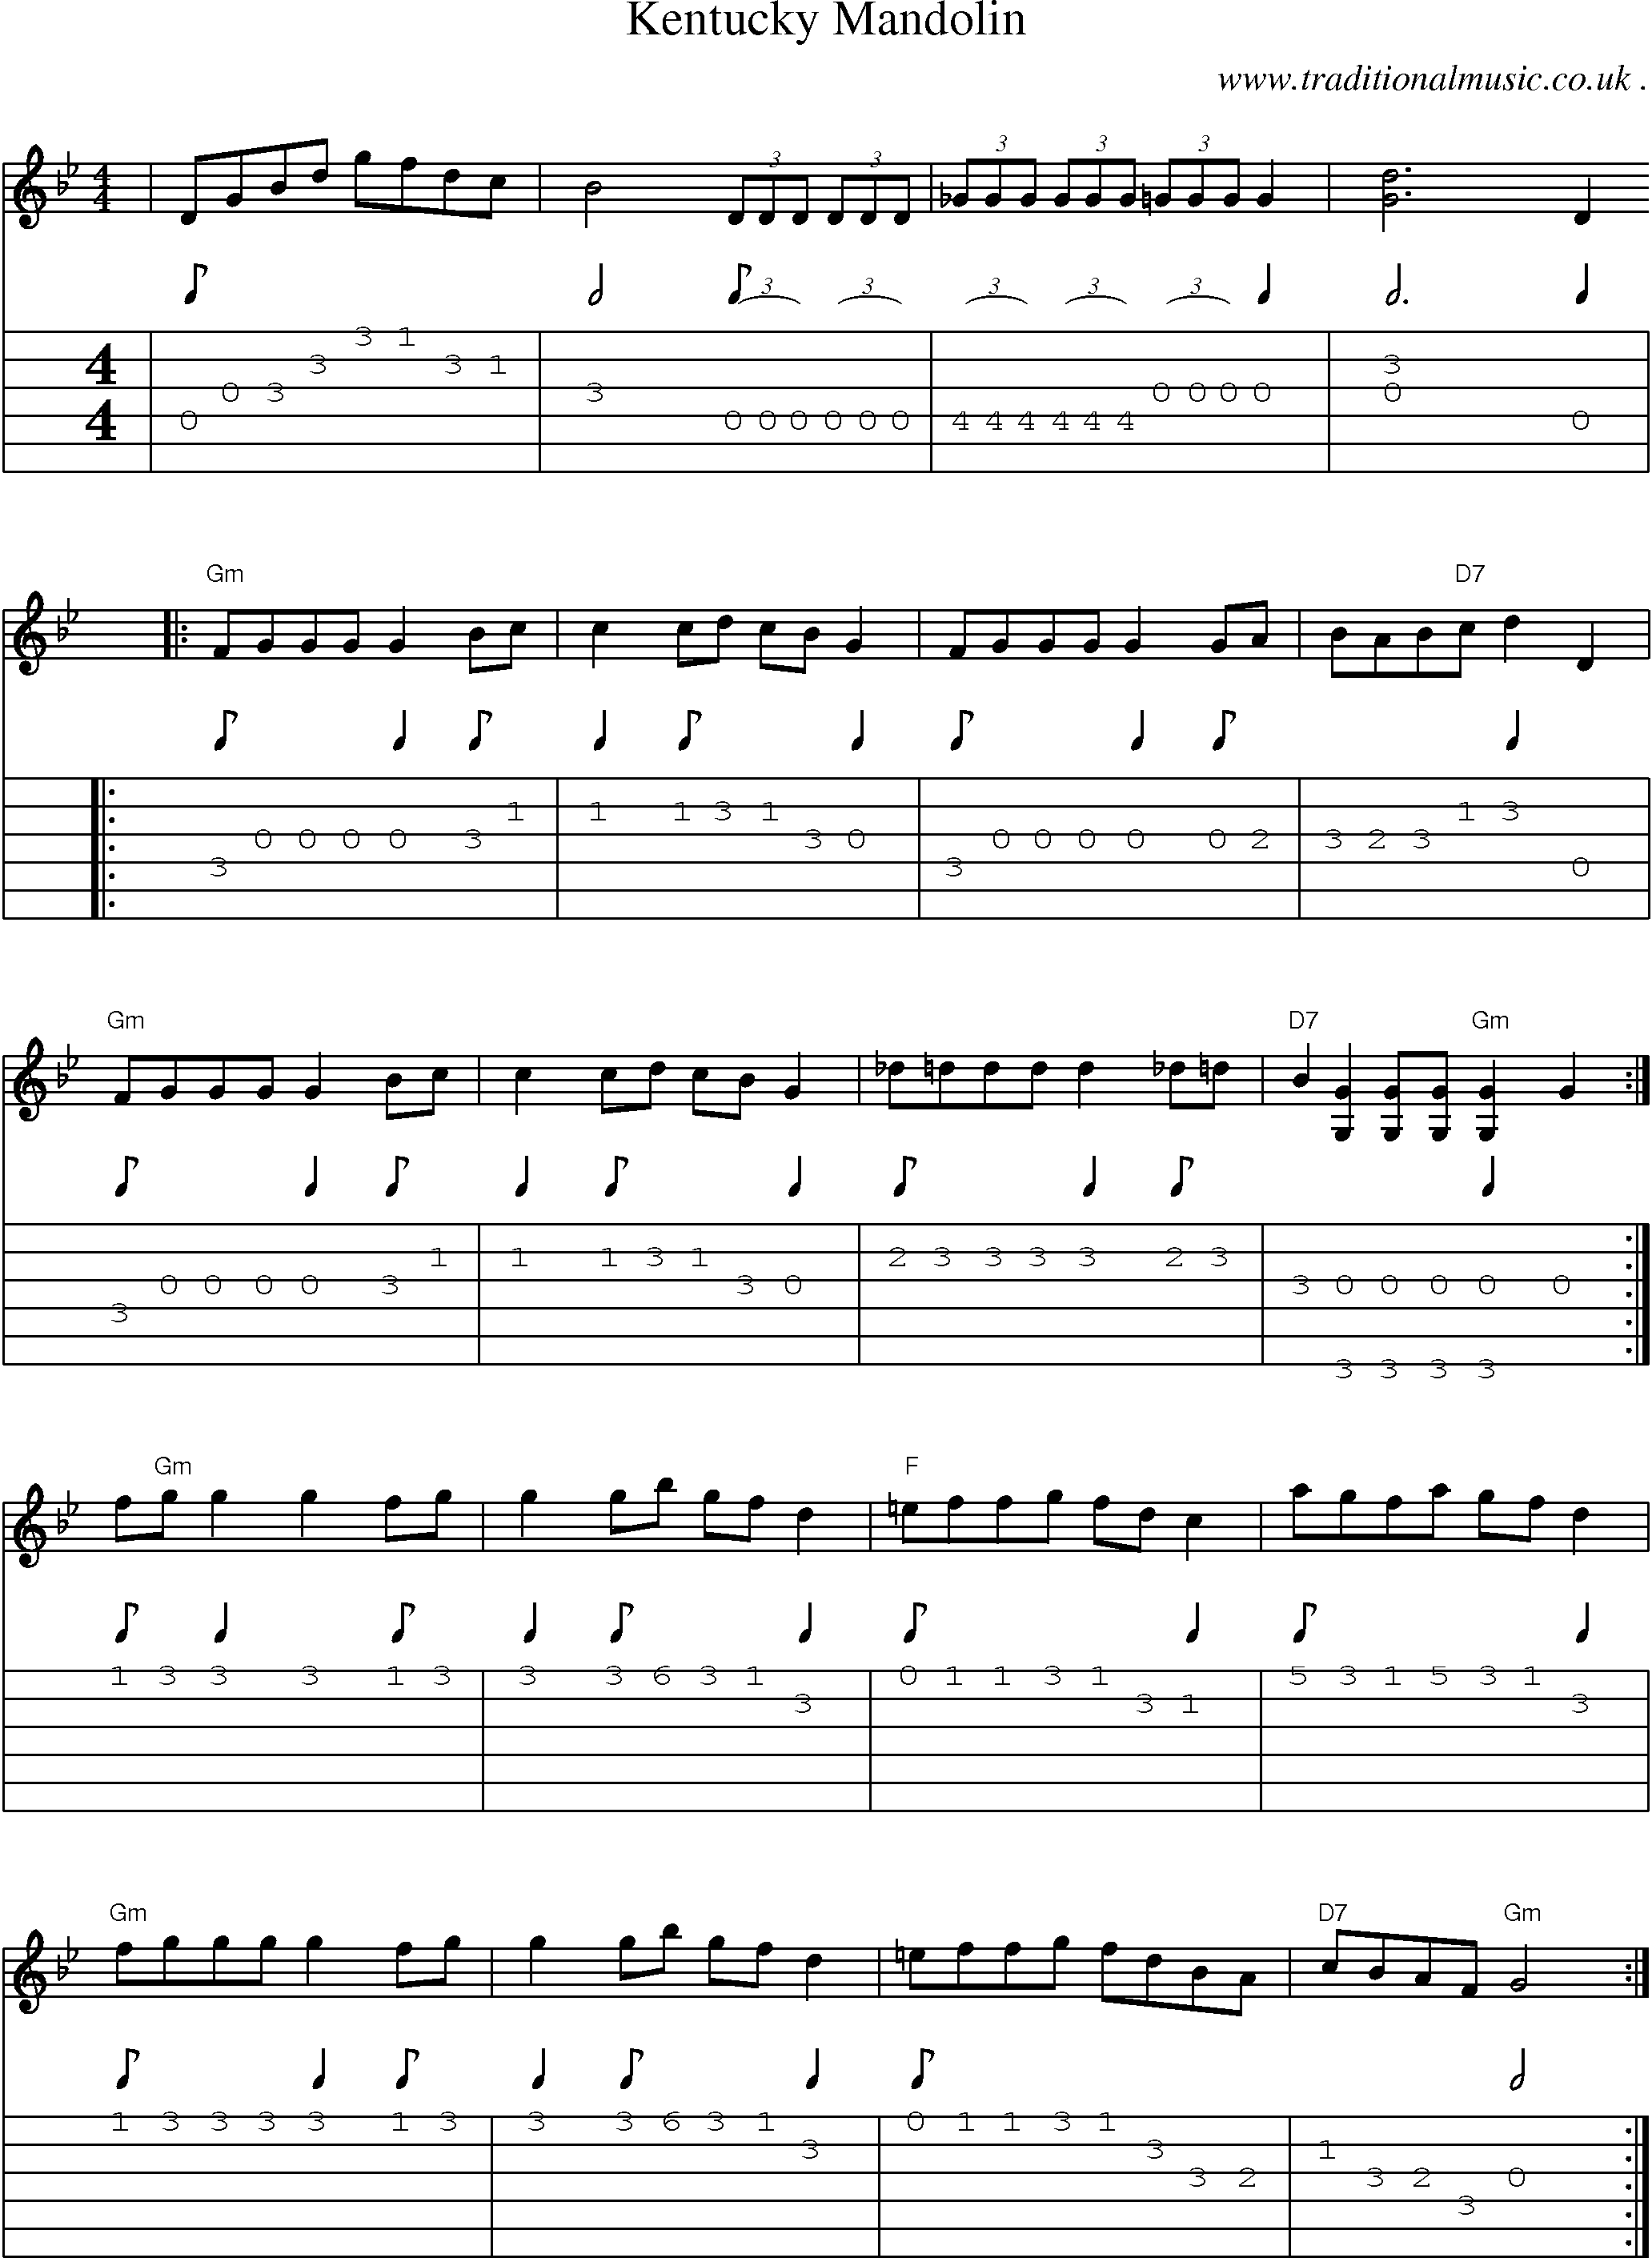 Music Score and Guitar Tabs for Kentucky Mandolin